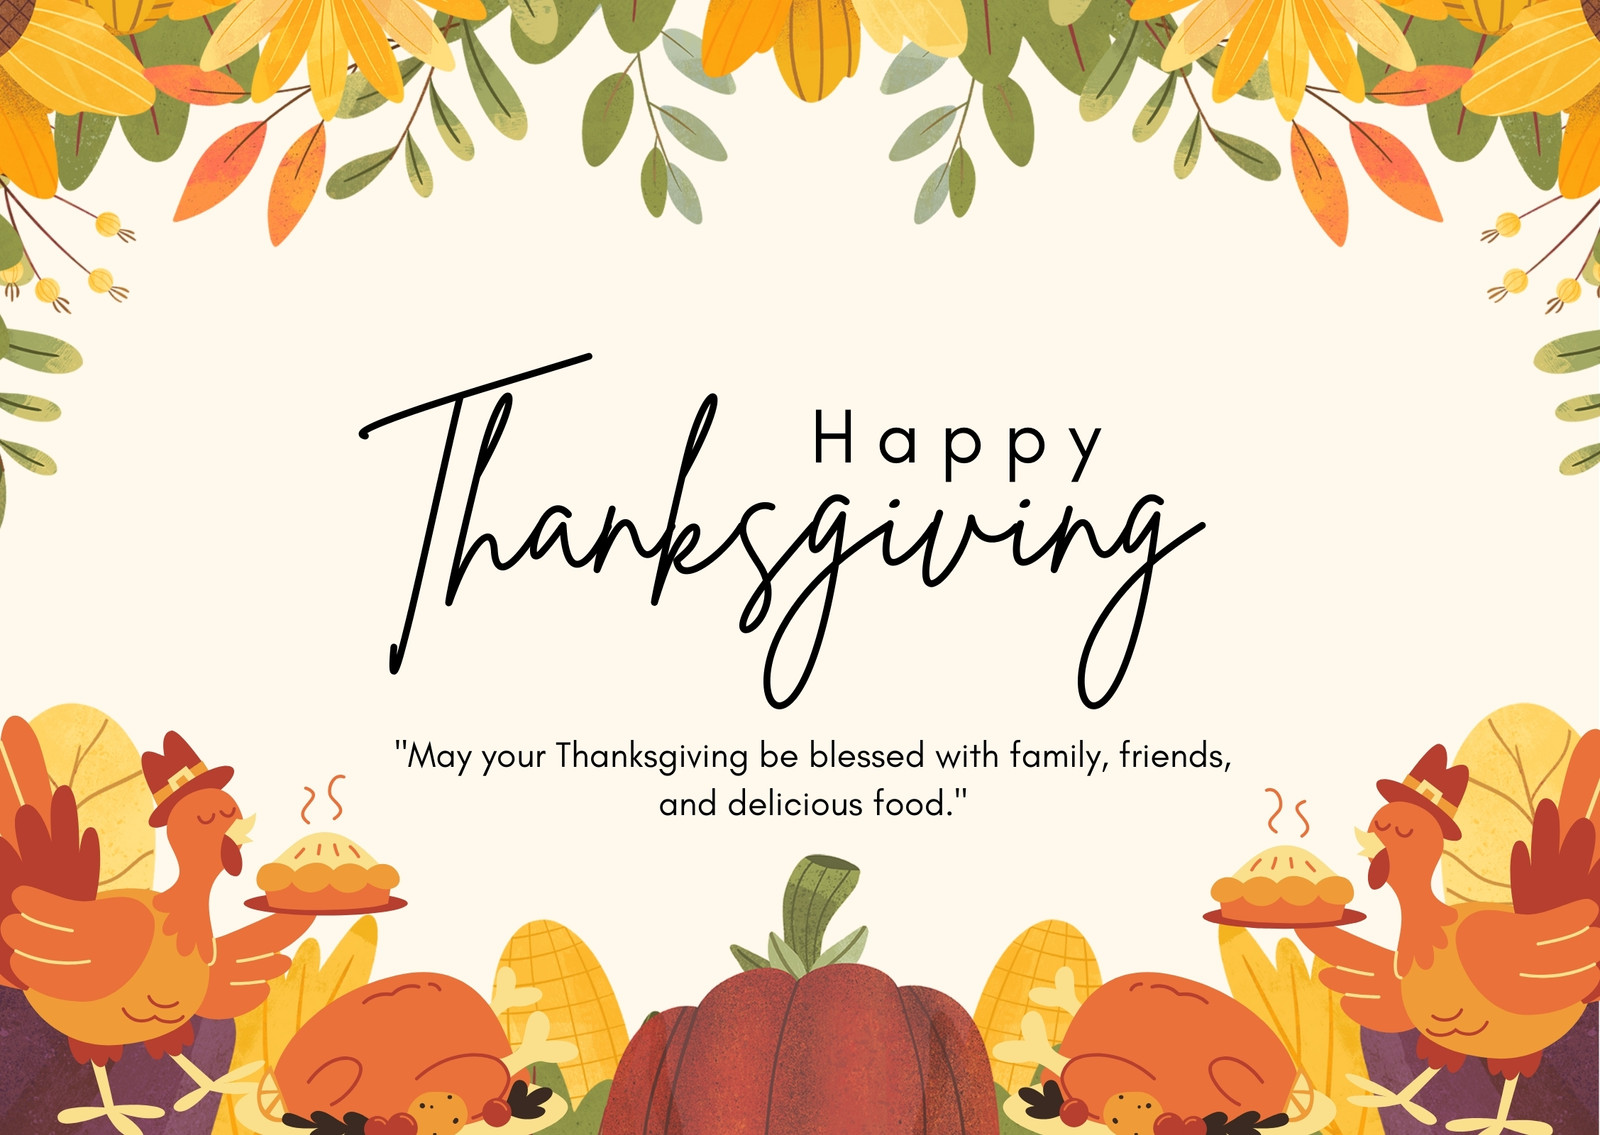 Thanksgiving Day wishes for clients, colleagues, boss